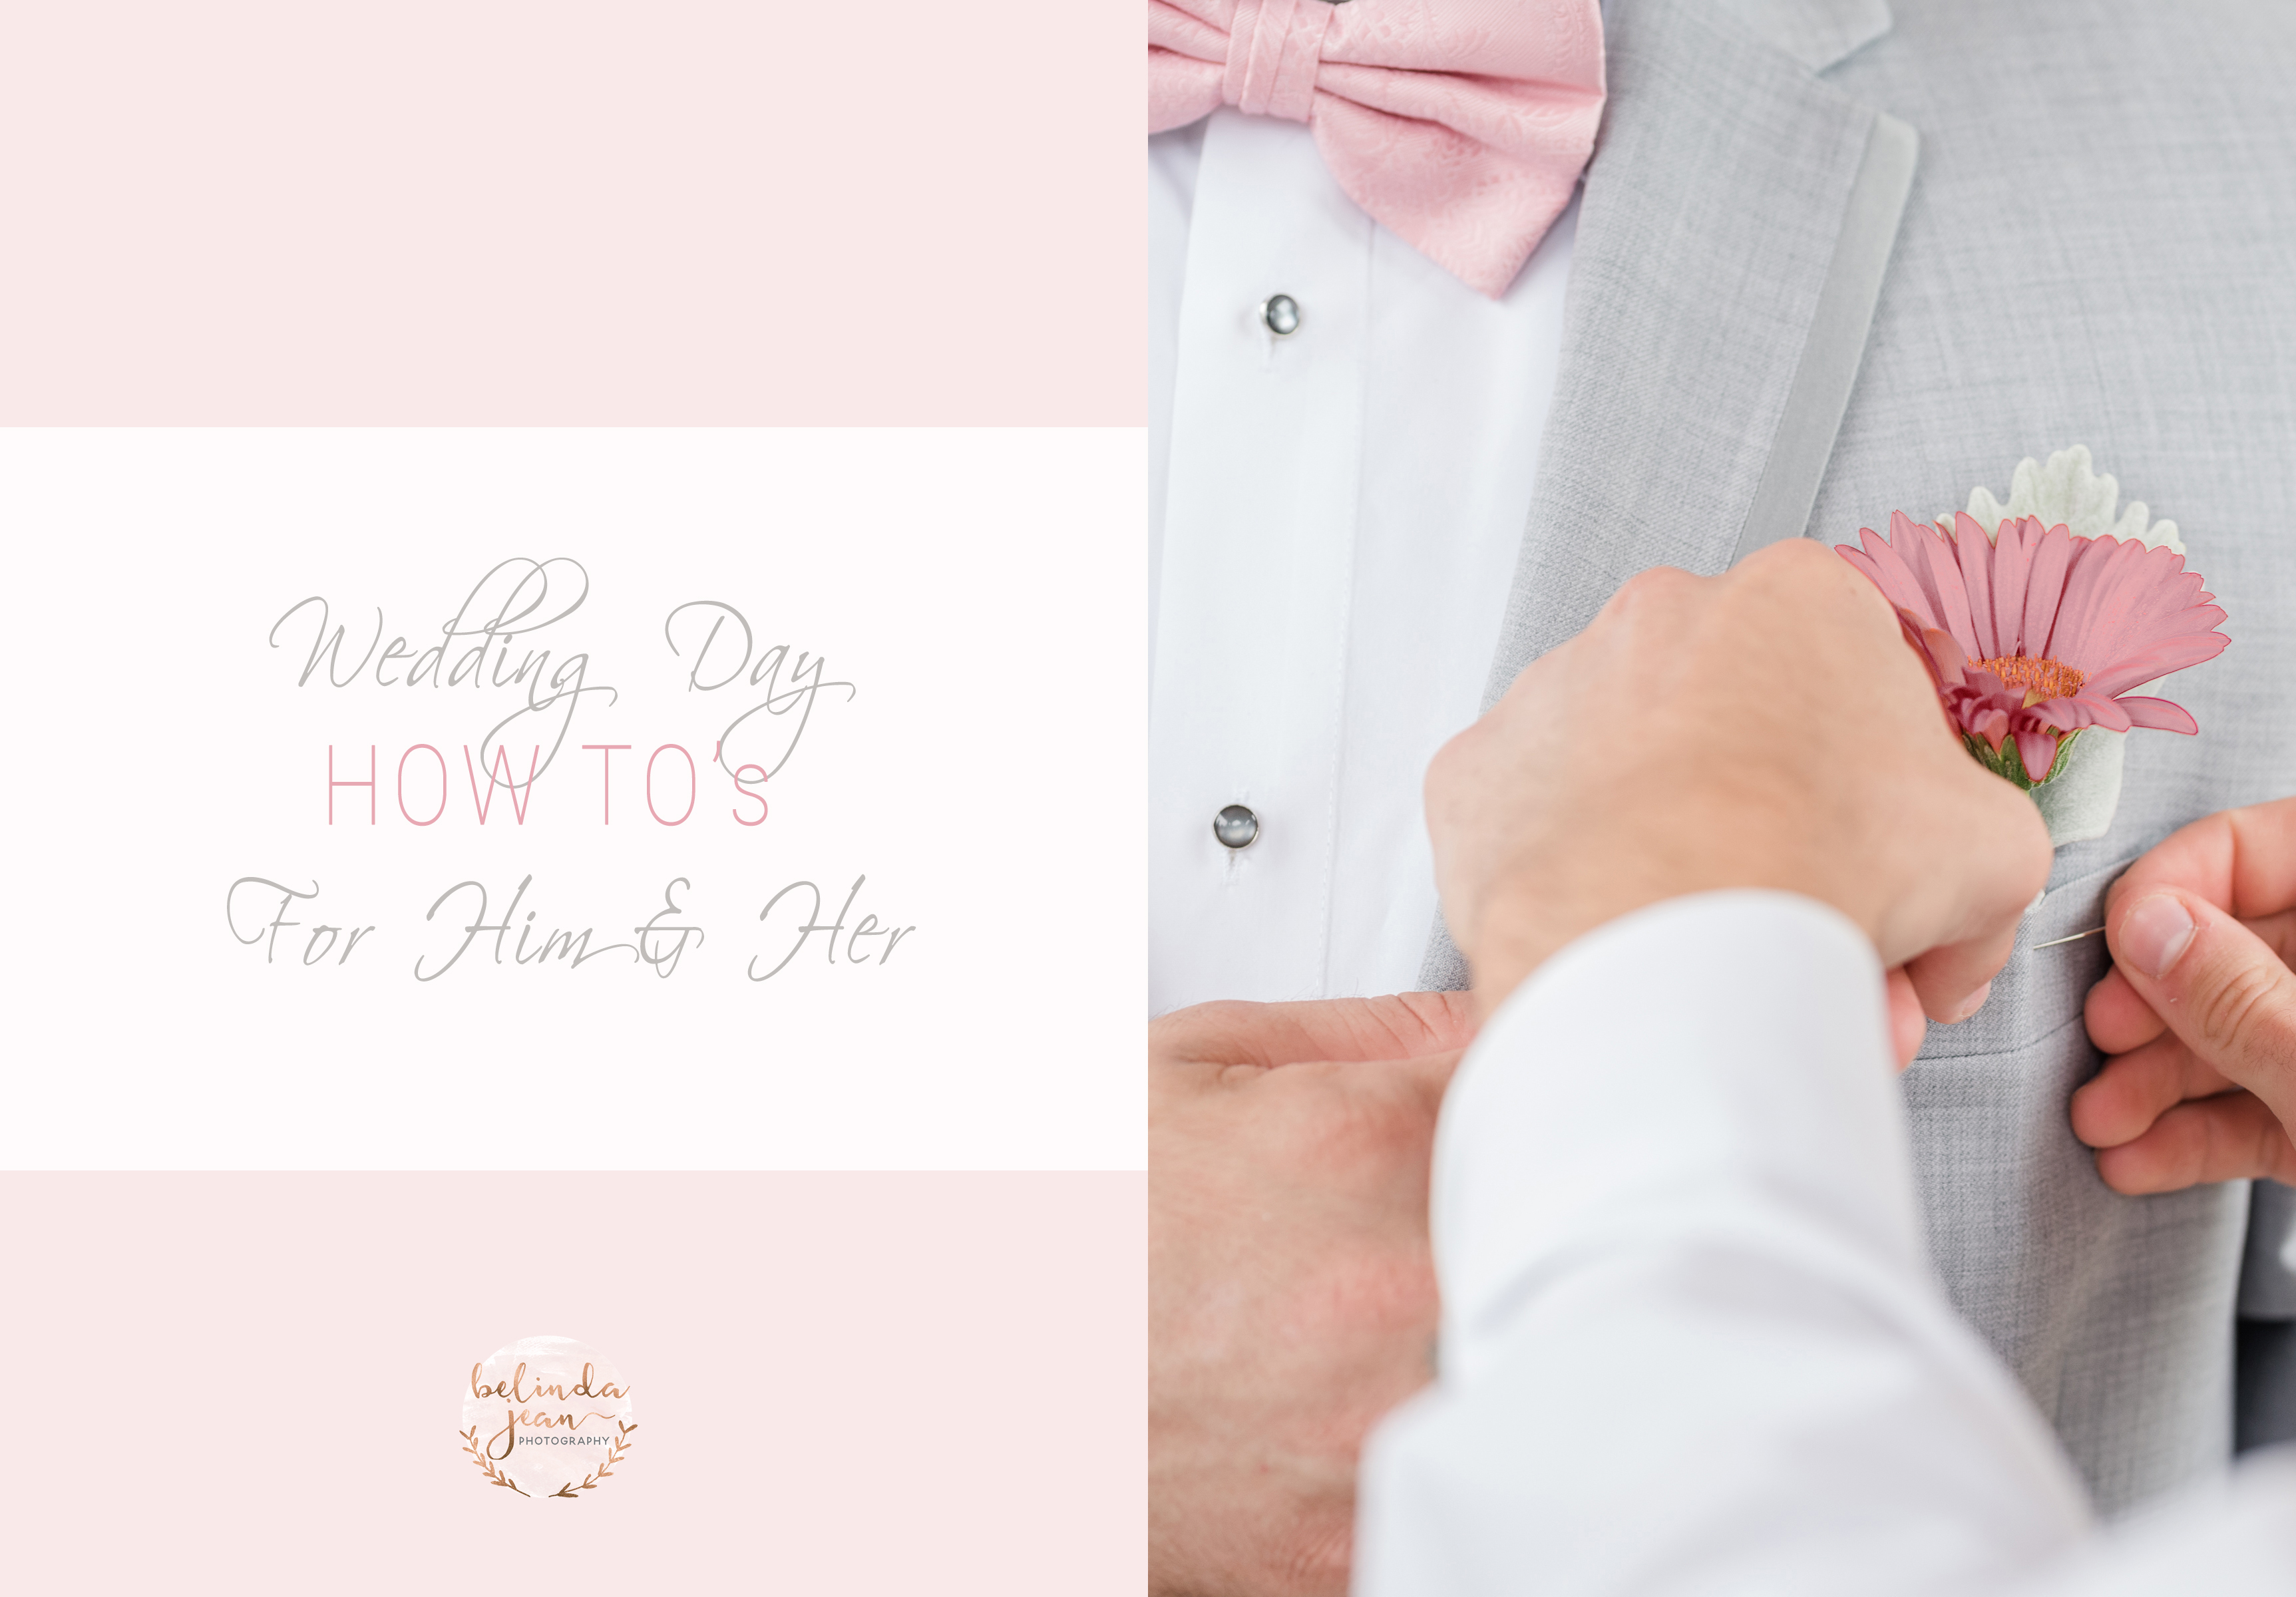 Wedding Day How To's